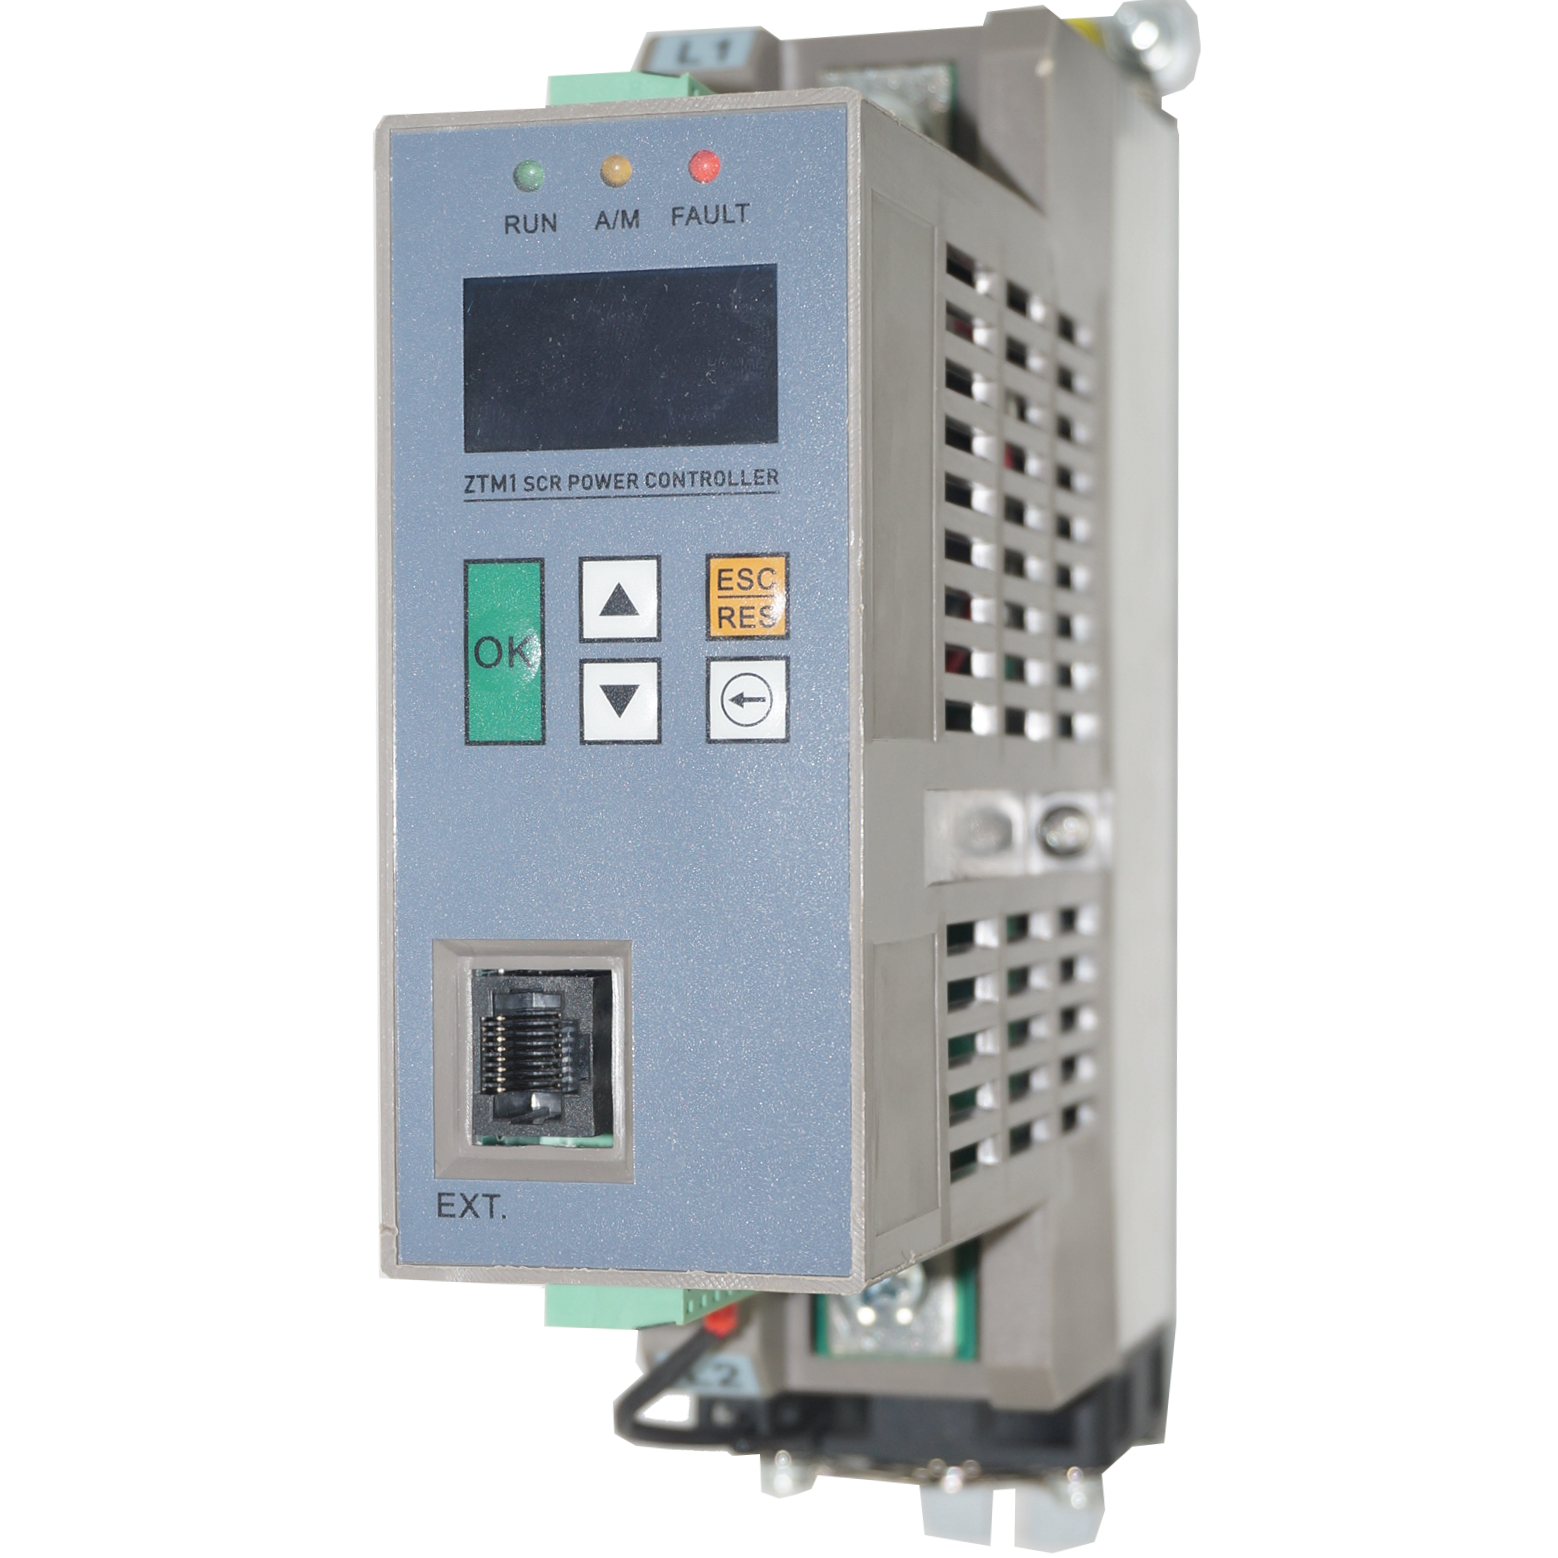 FTM1-A40-V4-W0, Single Phase, Phase Angle/Burst Controller for Primary Control of Transformer (Phase Angle mode only), Voltage/Current/Power Limit Modes, For Single Phase Loads, 400VAC, 32 Amps @ 50 Deg C